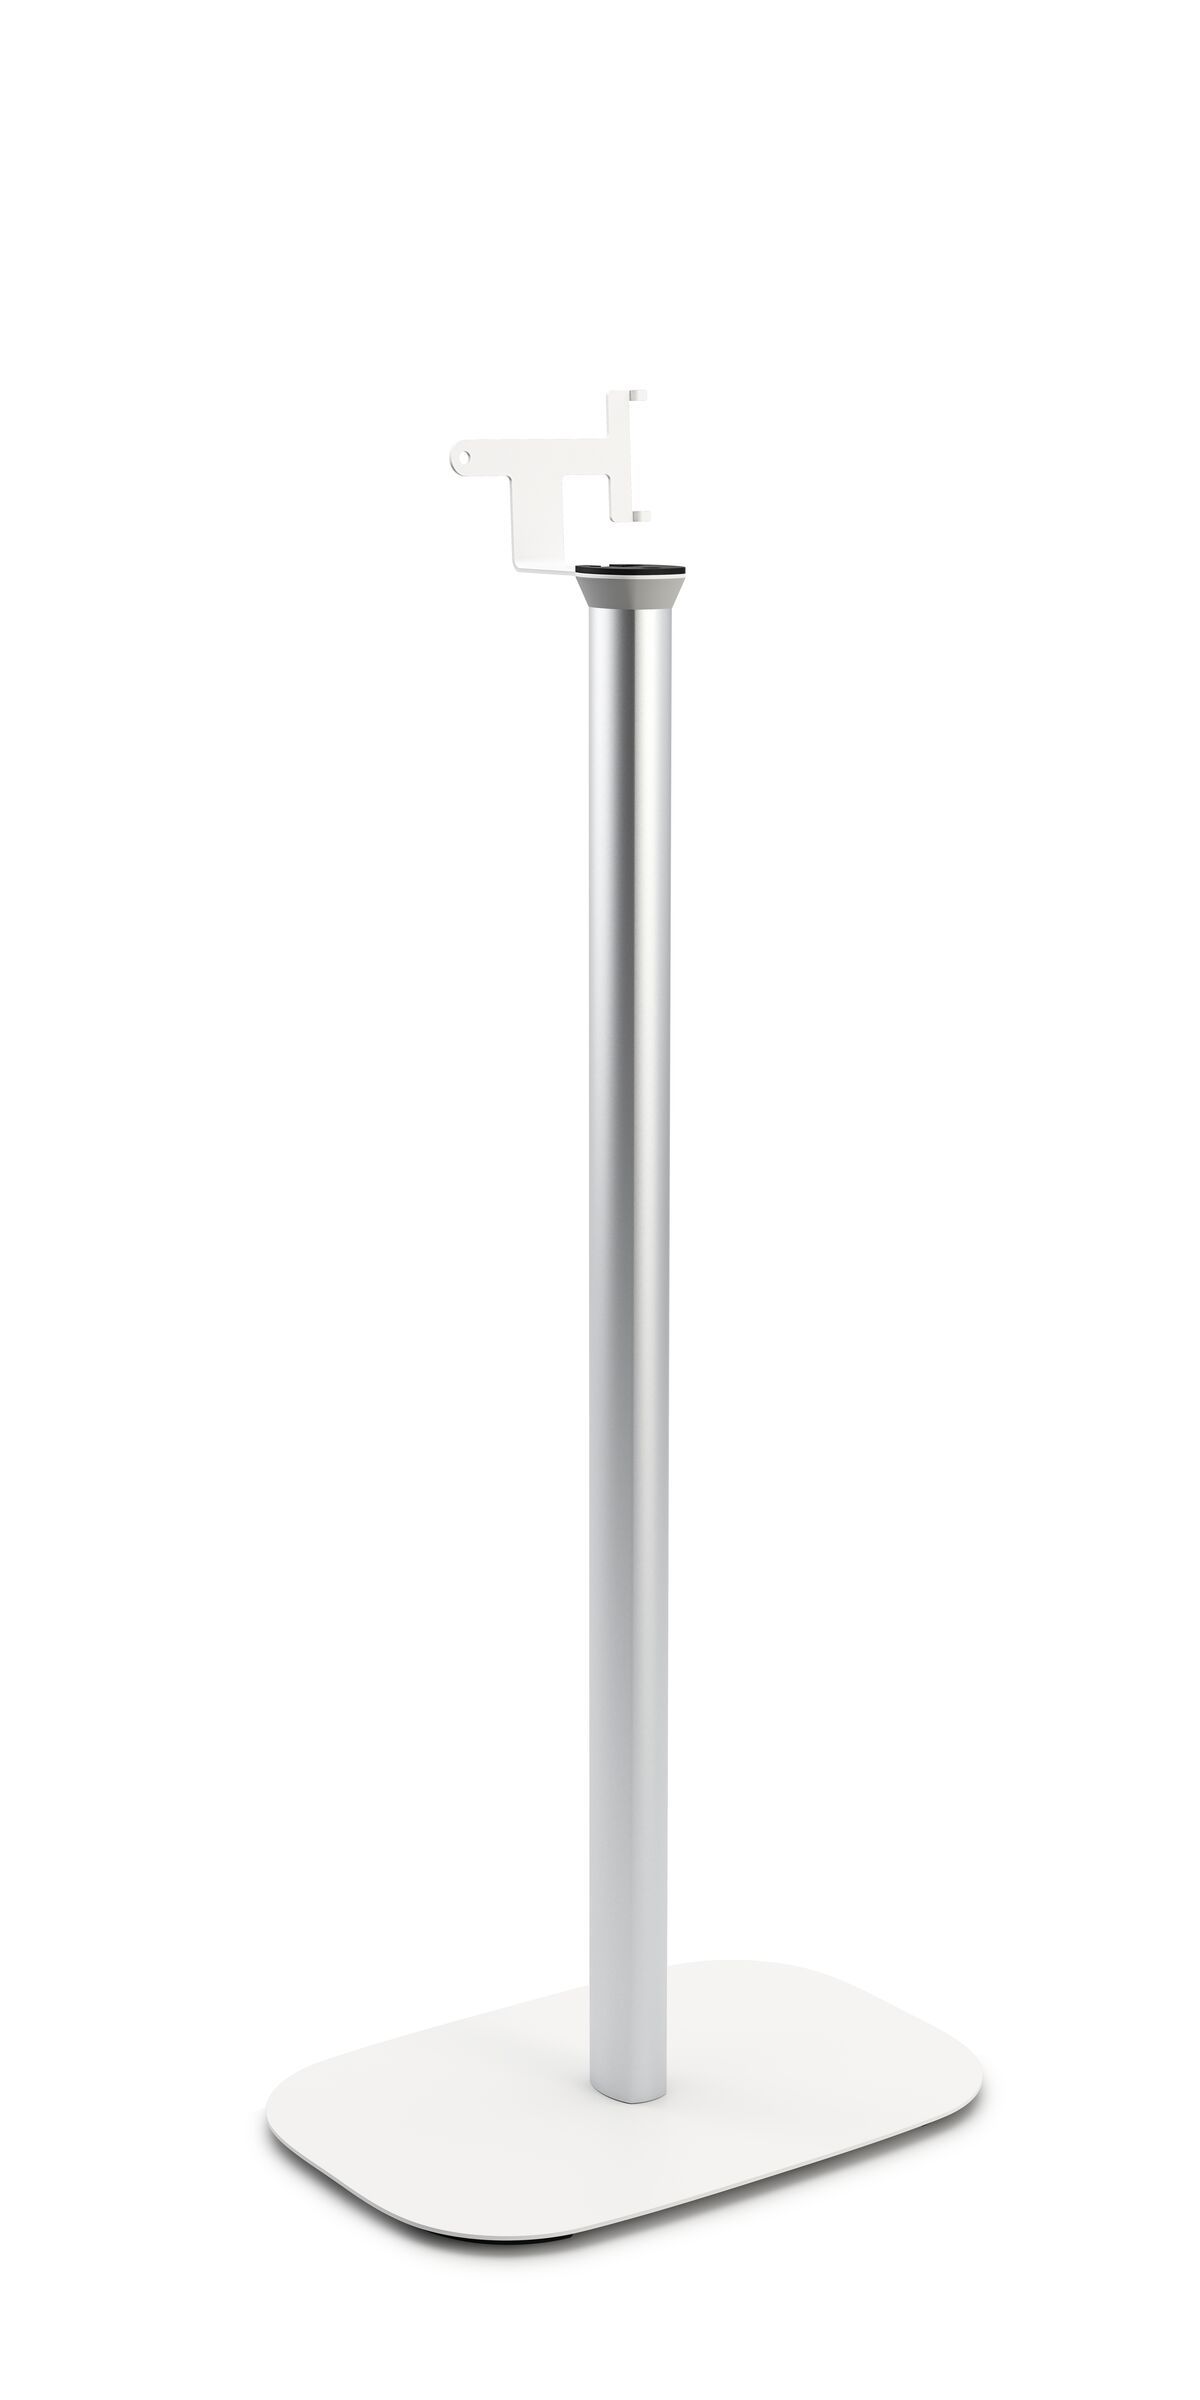 Vogel's SOUND 4303 Speaker Stand for SONOS PLAY:3 (white) - Product